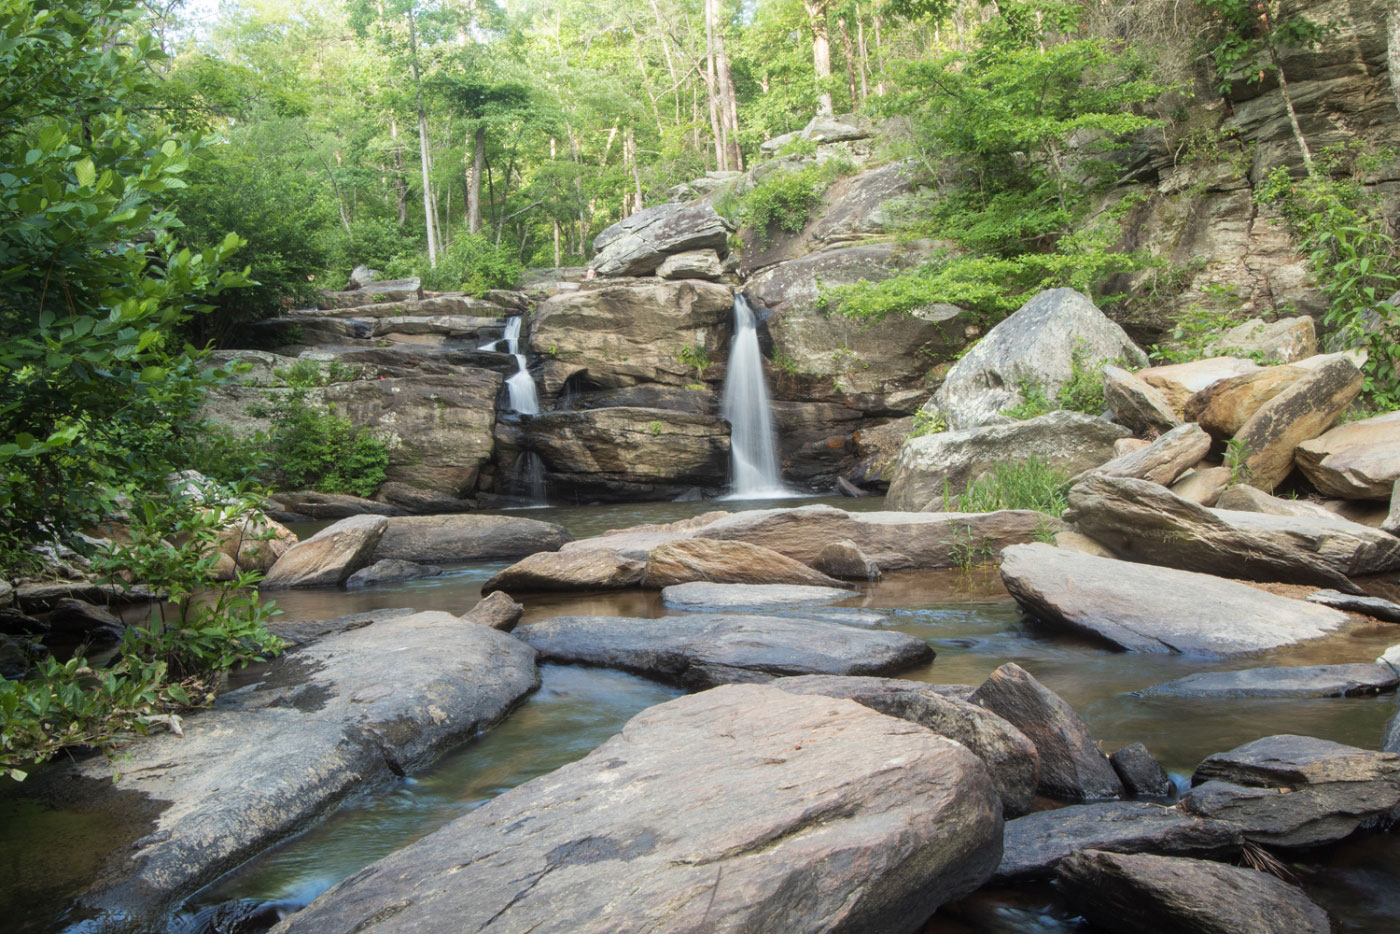 Hike Cheaha Falls via Chinnabee Silent Trail in Talladega National Forest, Alabama - Stav is Lost